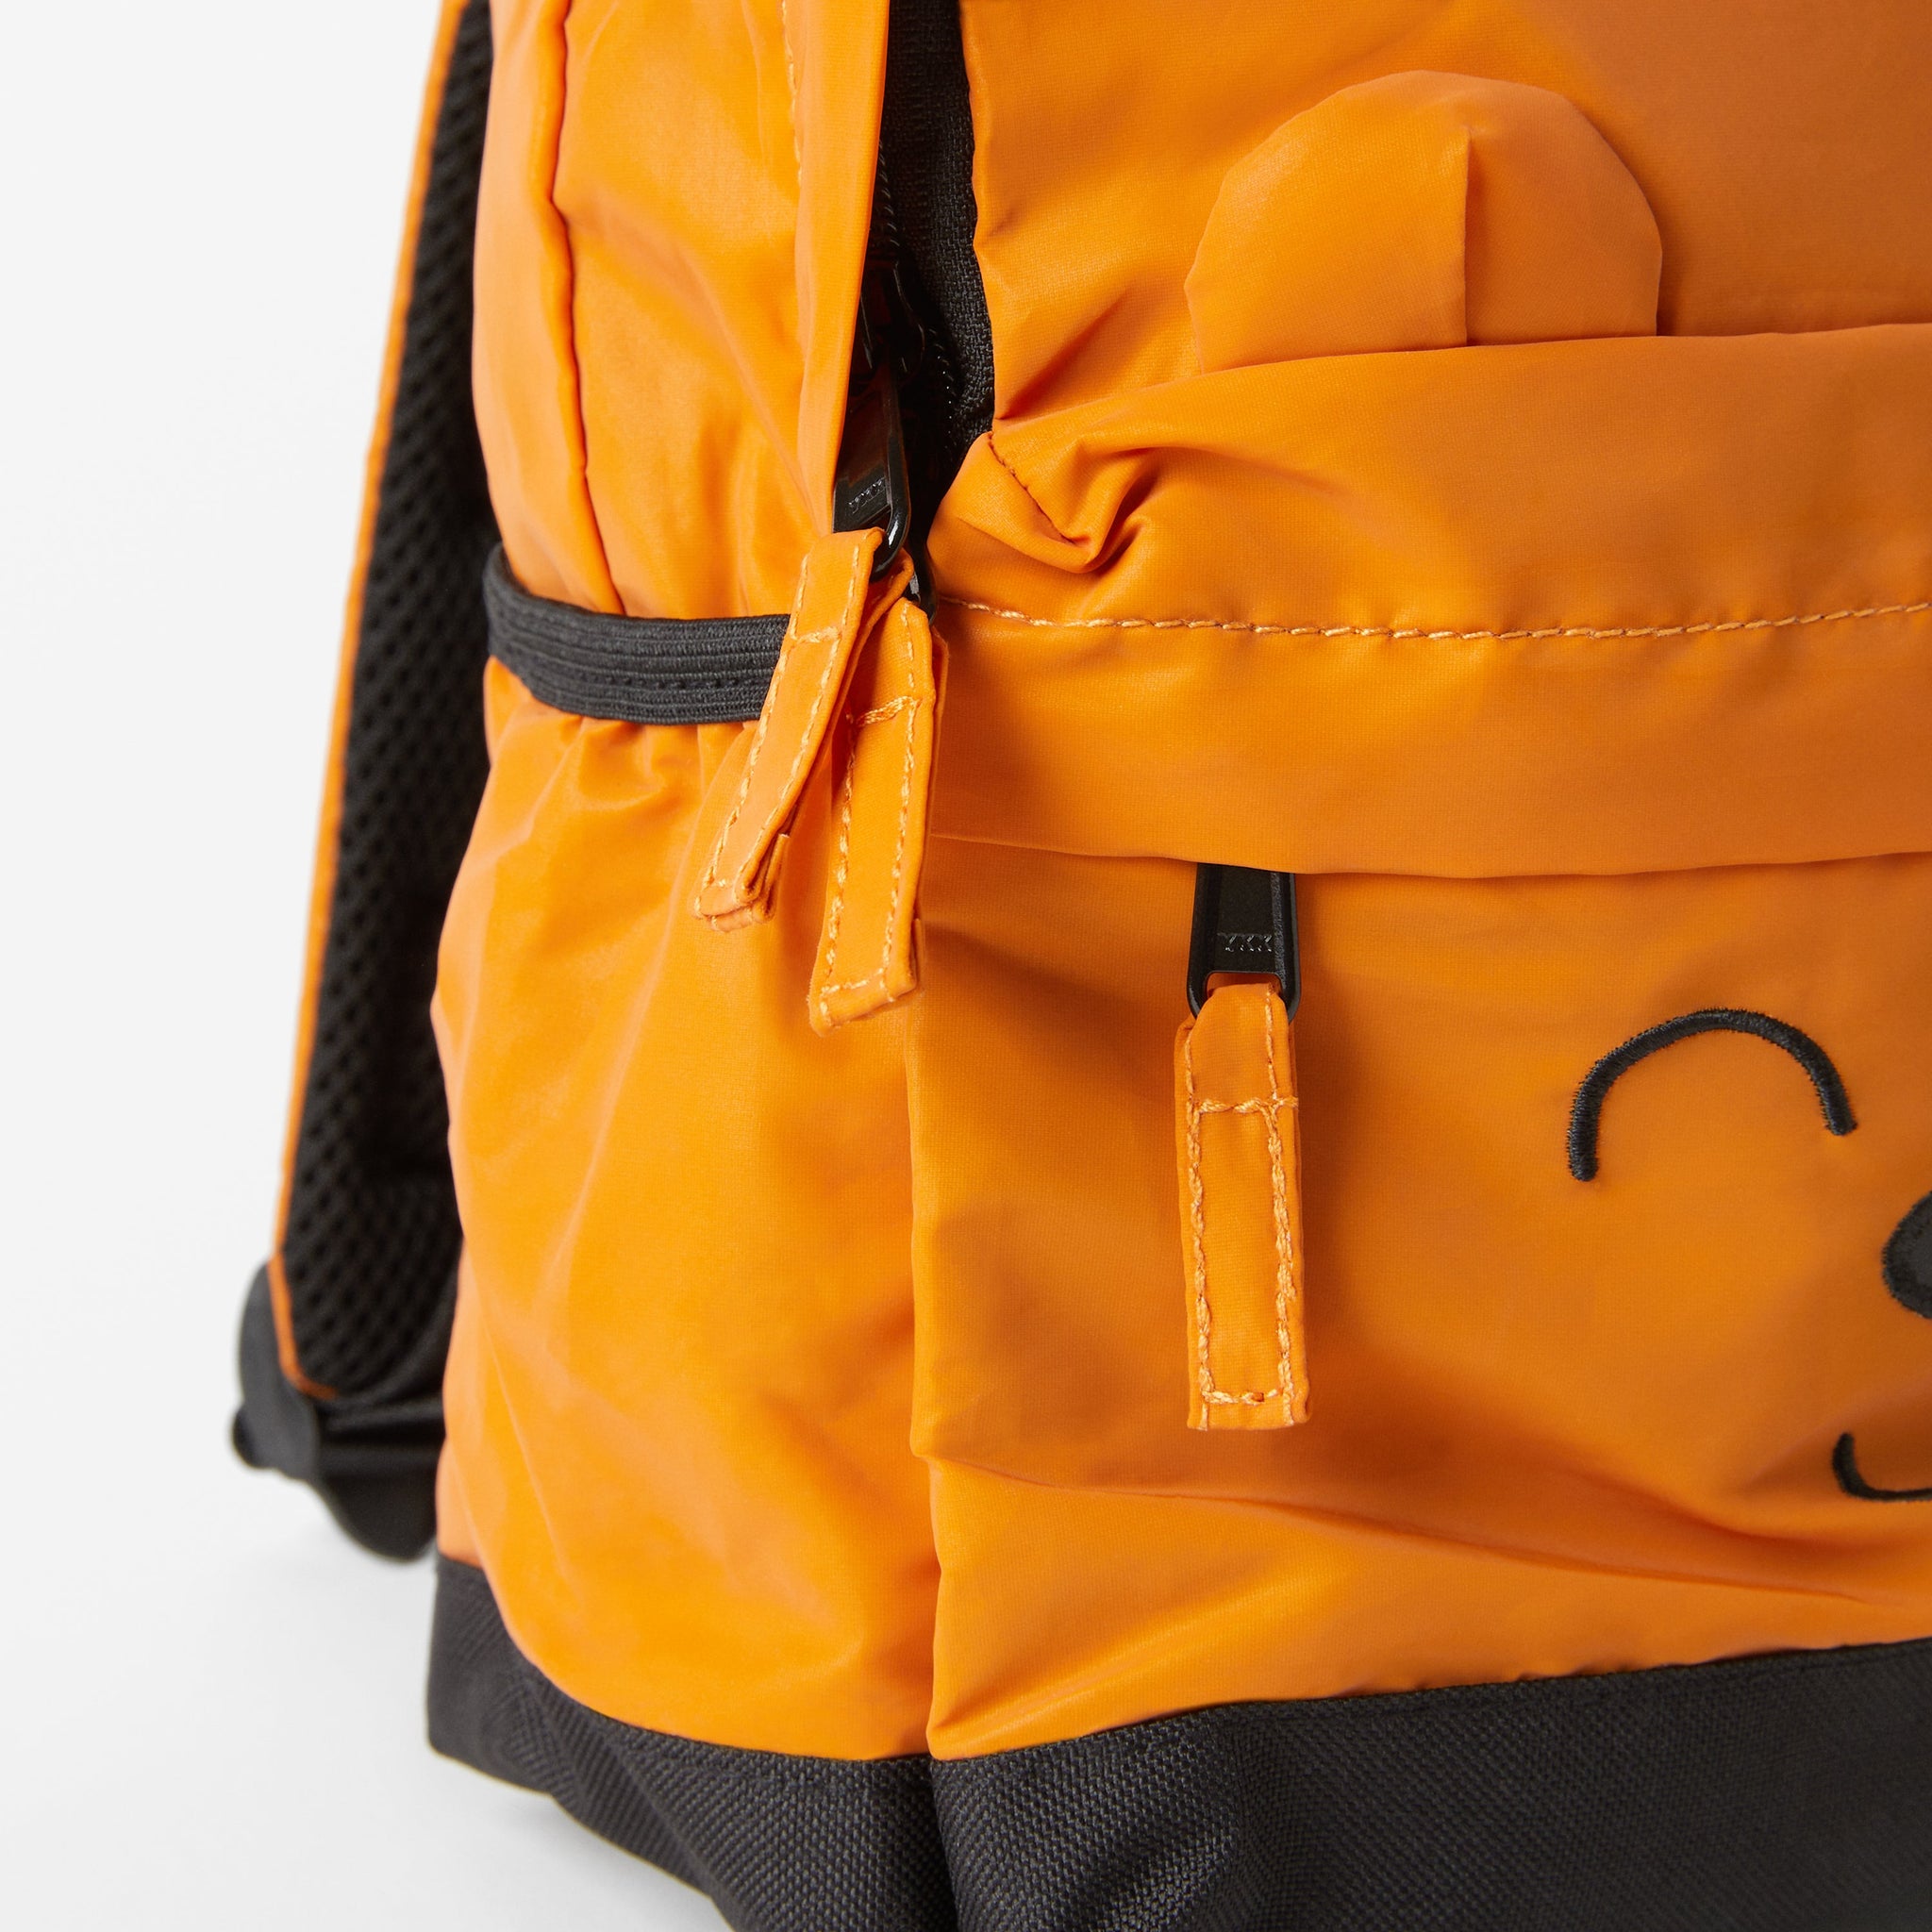 Reflective Orange Kids Backpack from the Polarn O. Pyret Kidswear collection. The best ethical kids clothes